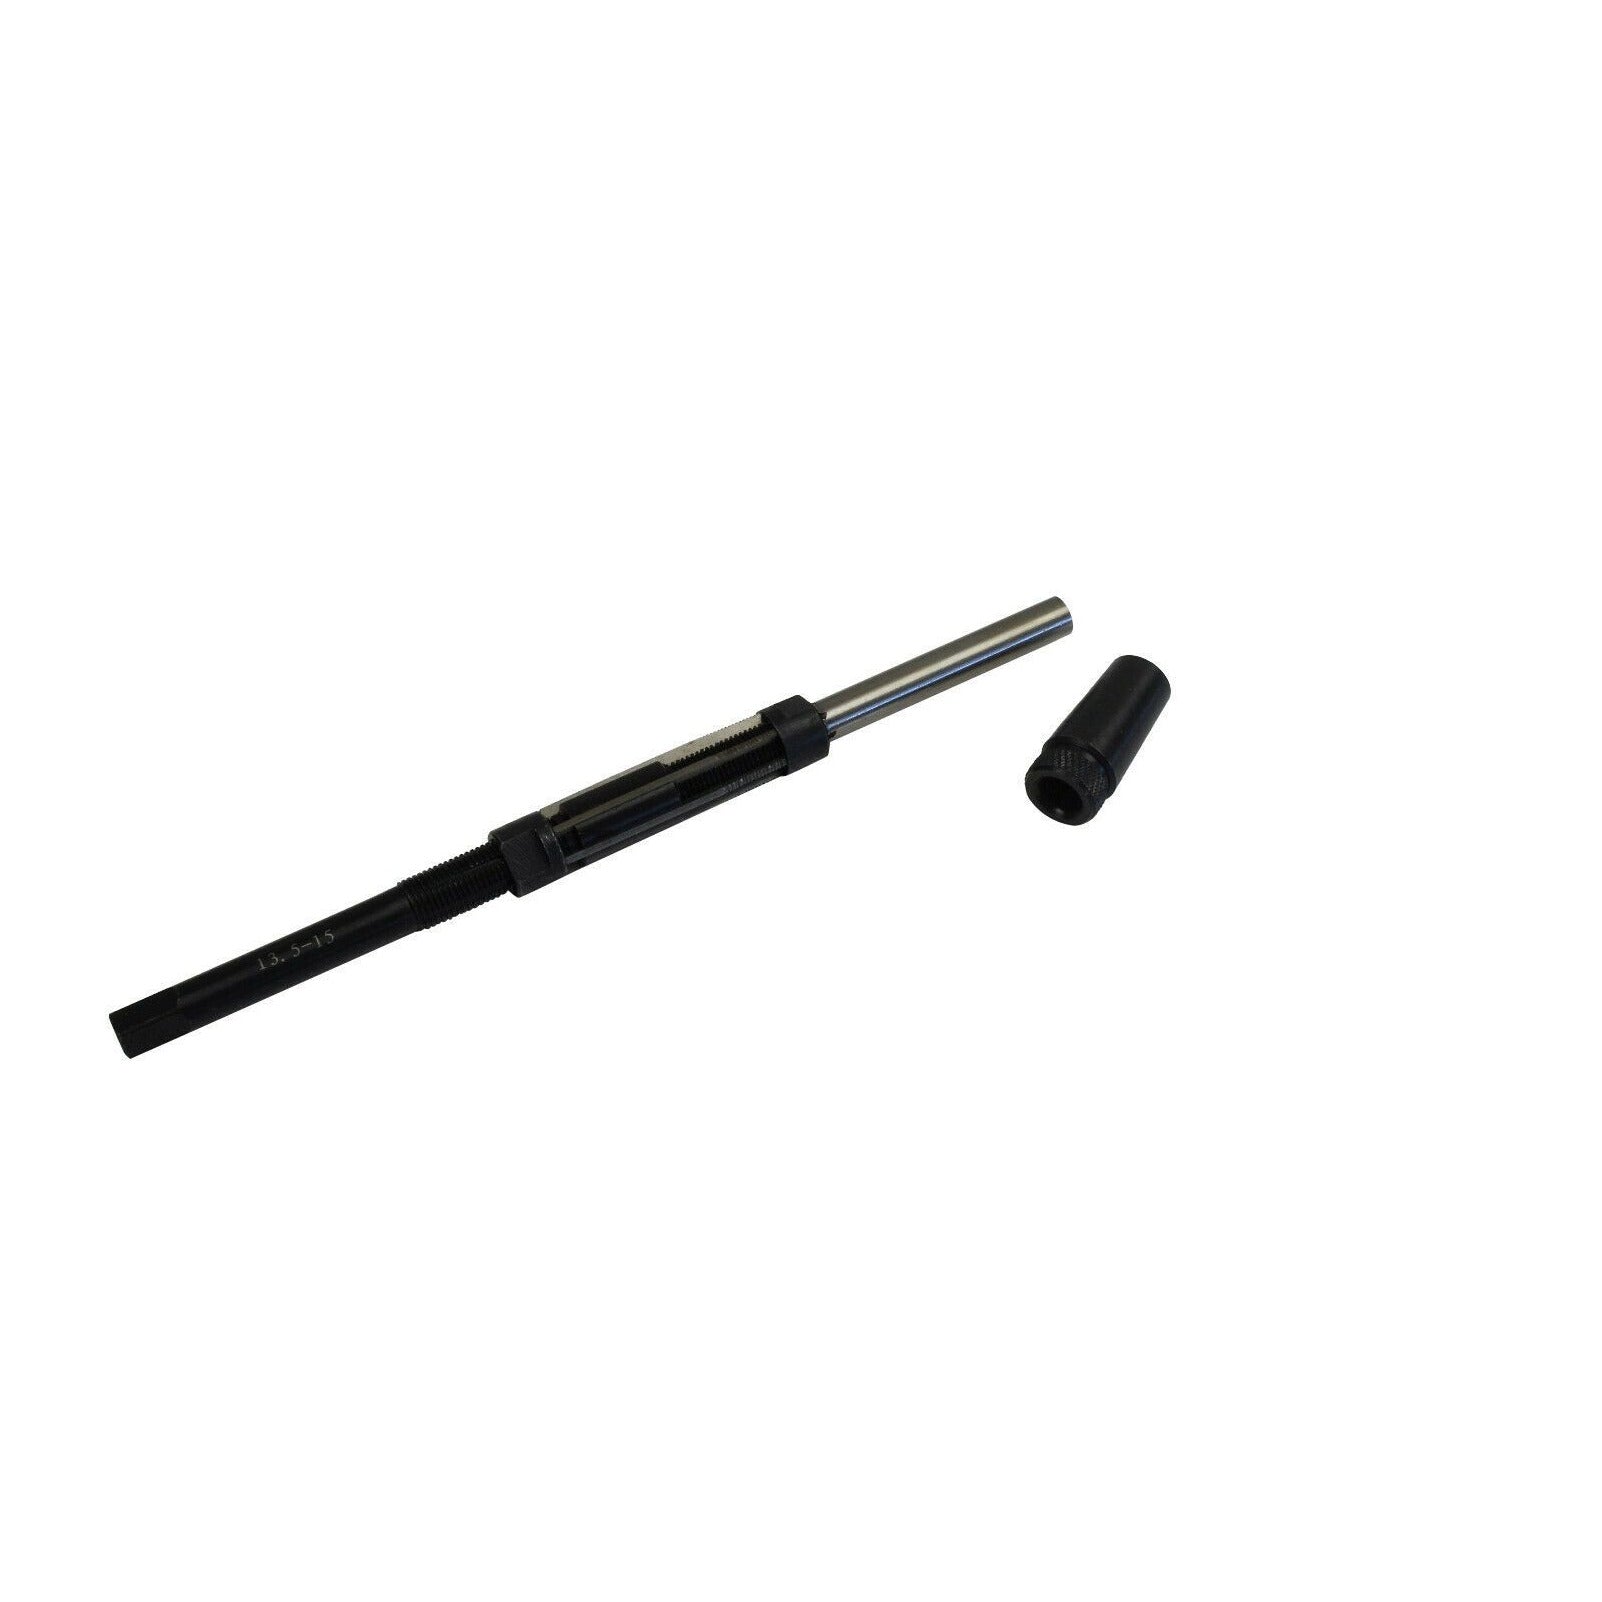 13.5 - 15mm Adjustable Hand Reamer with Guide